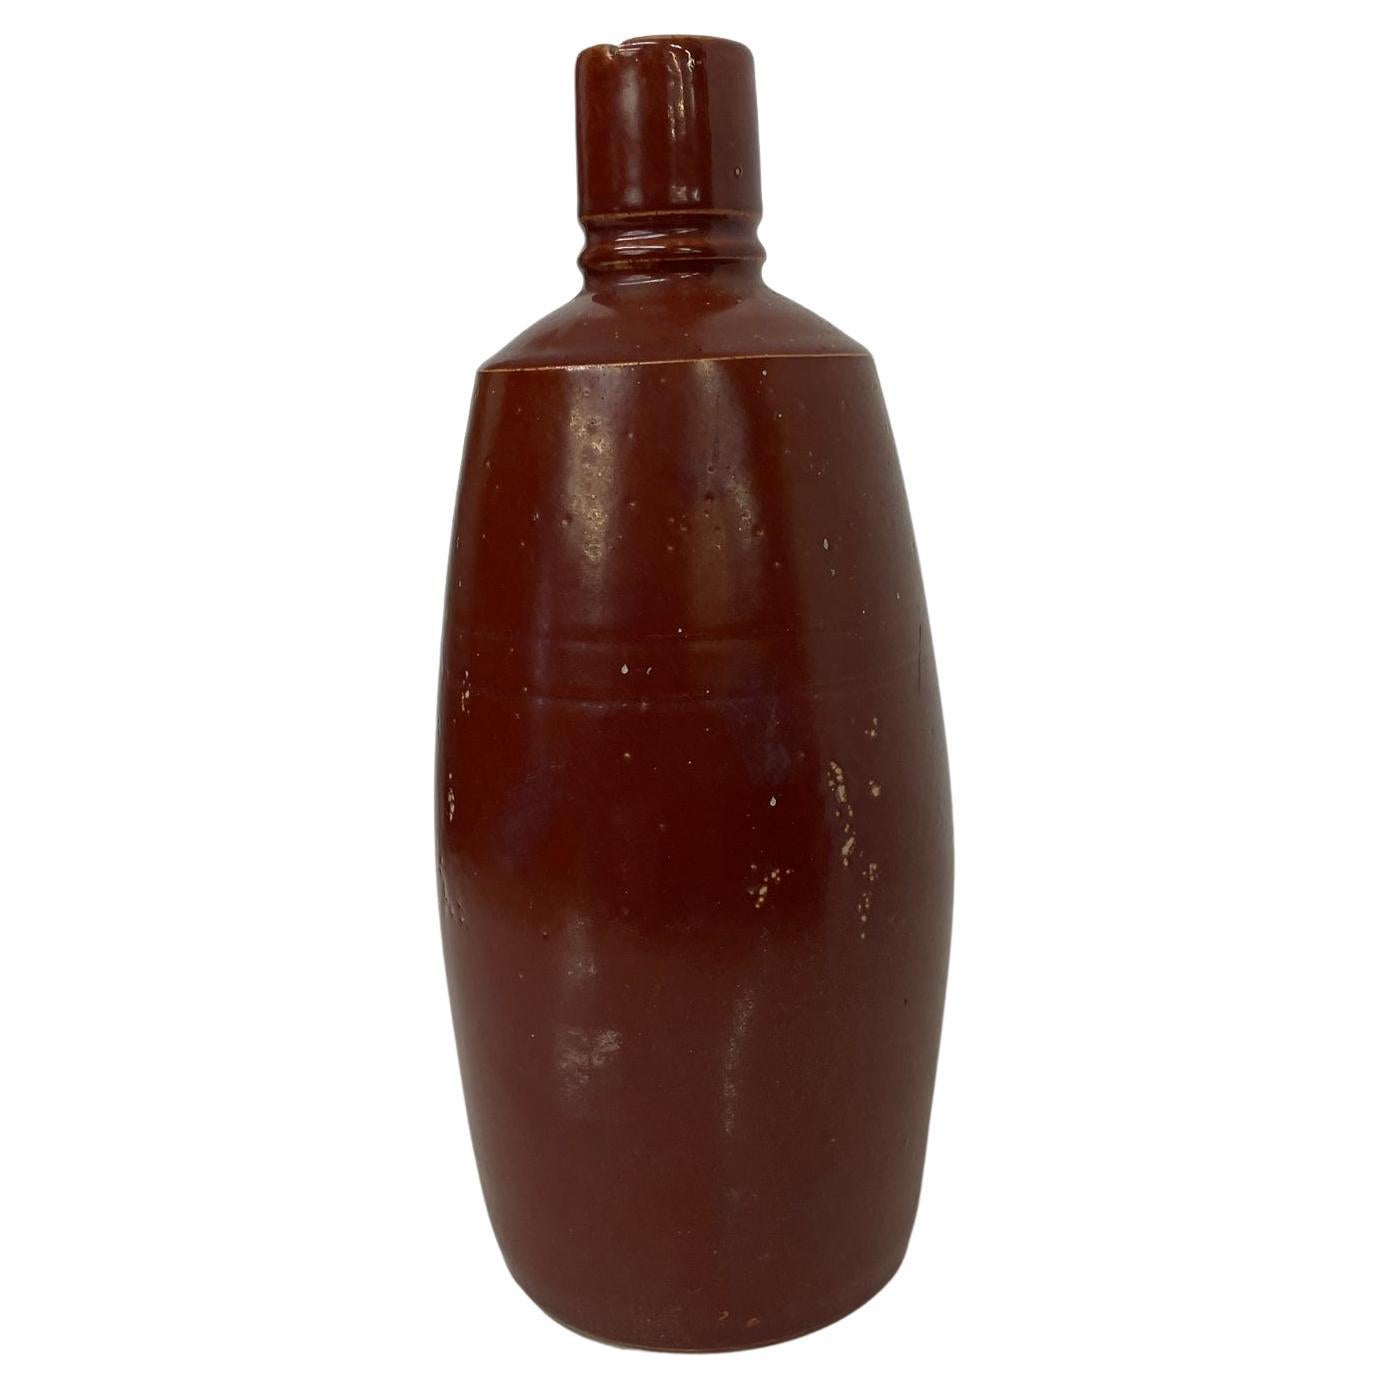 Ceramic art pottery bottle
Portugal red brown bottle lancers wine ceramic art pottery 1970s
Measures: 9.13 tall x 3.75 diameter
Preowned unrestored original vintage condition
See images provided.
 